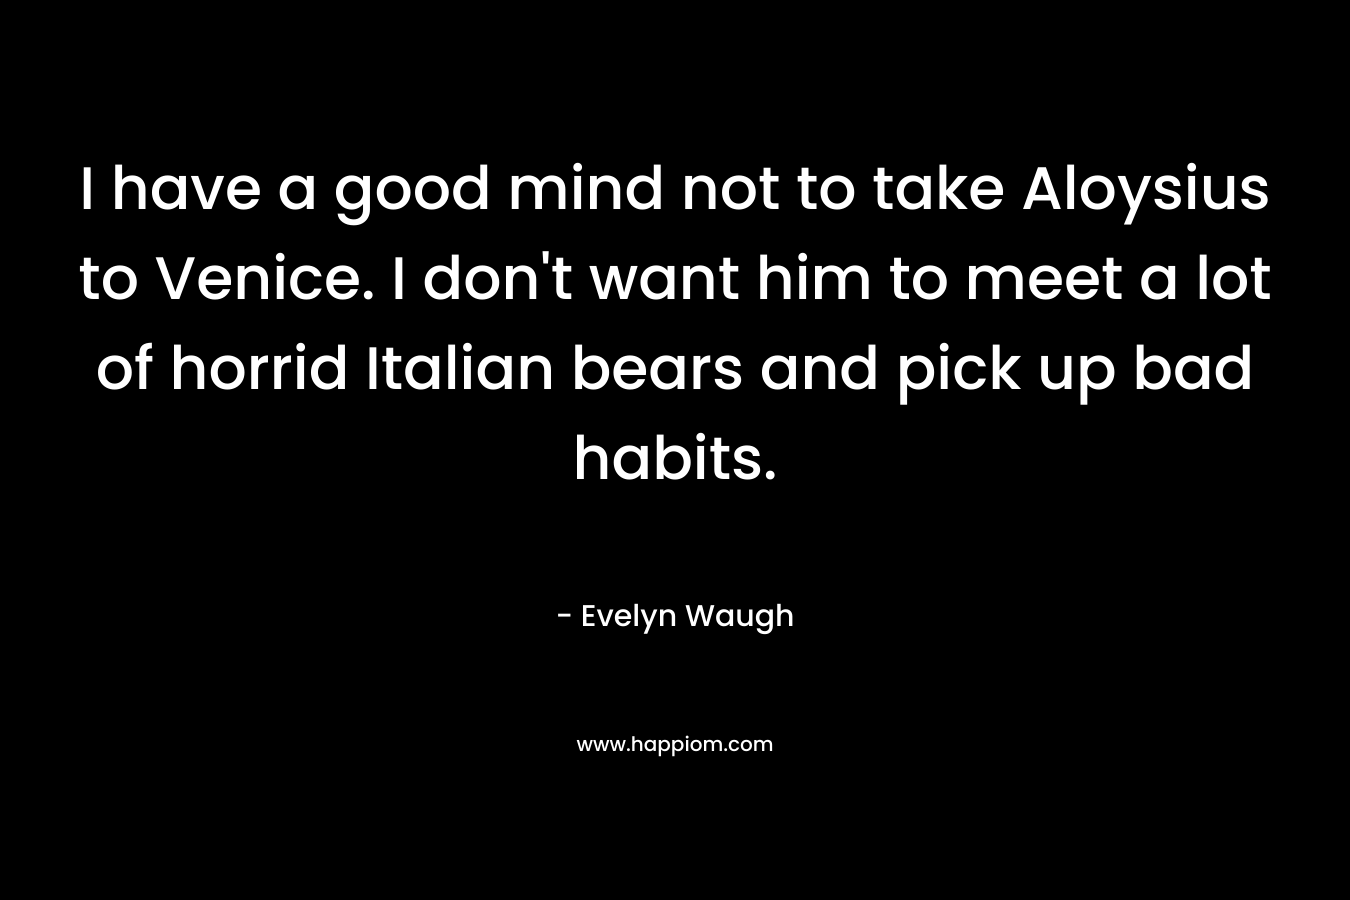 I have a good mind not to take Aloysius to Venice. I don’t want him to meet a lot of horrid Italian bears and pick up bad habits. – Evelyn Waugh